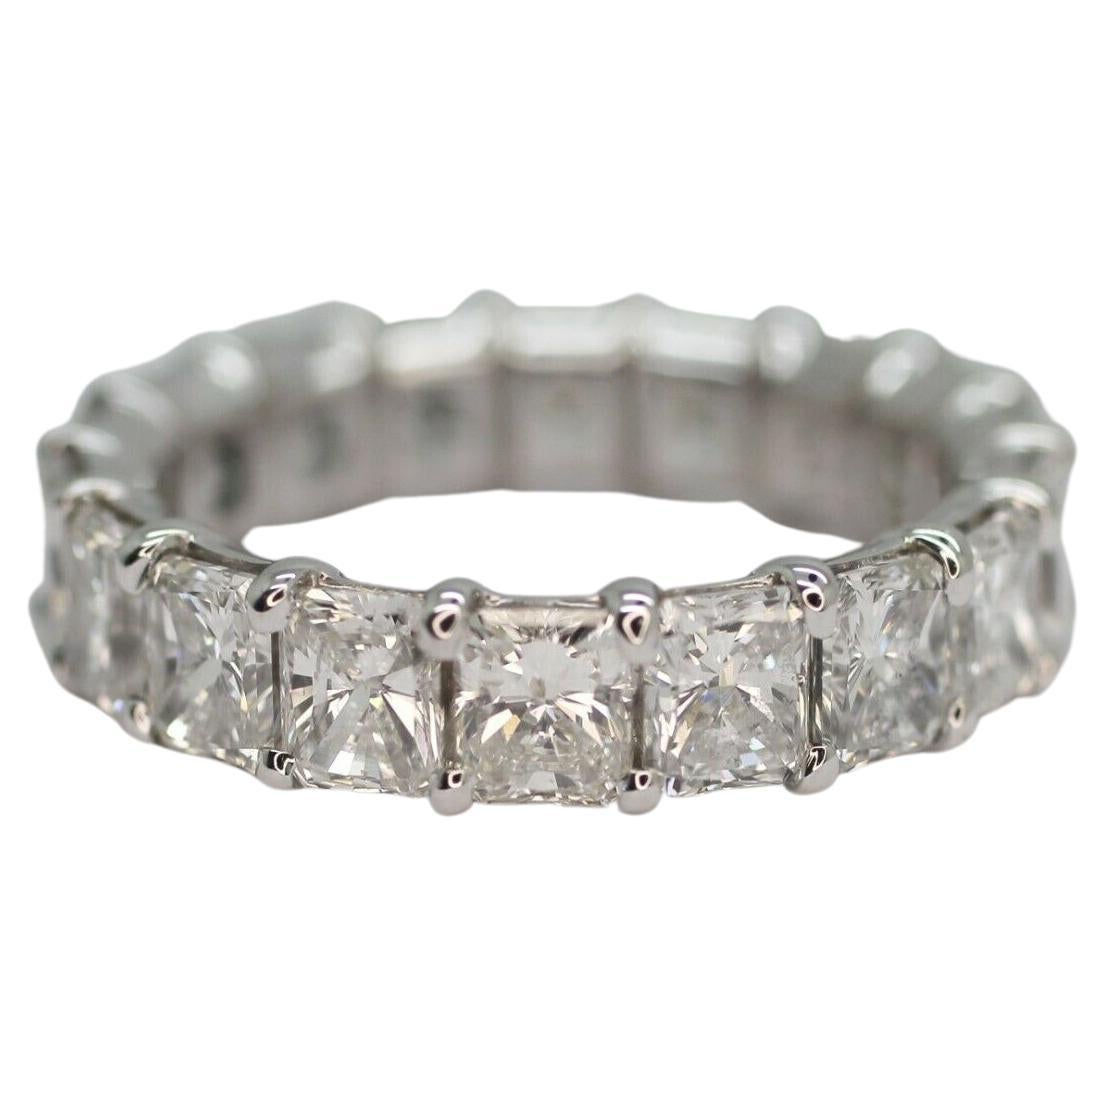 Radiant Cut Diamond 5.67cts. Eternity Ring Set in 14k White Gold